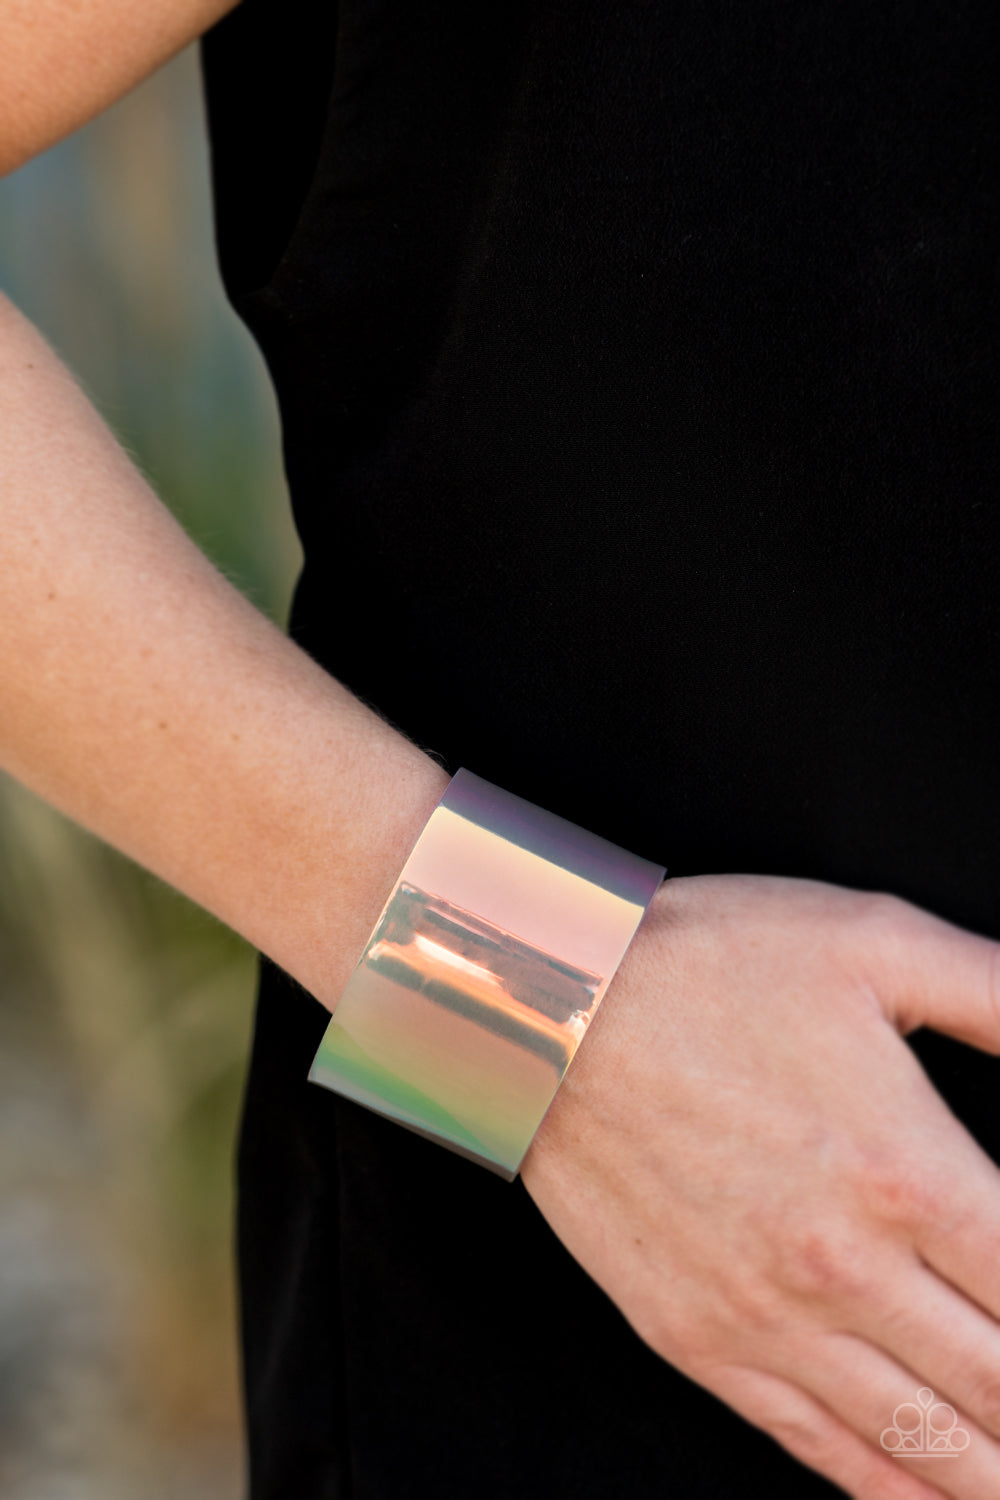 Apatico - Holographic Trouble Oring Cuff Bracelet - Iridescent PVC